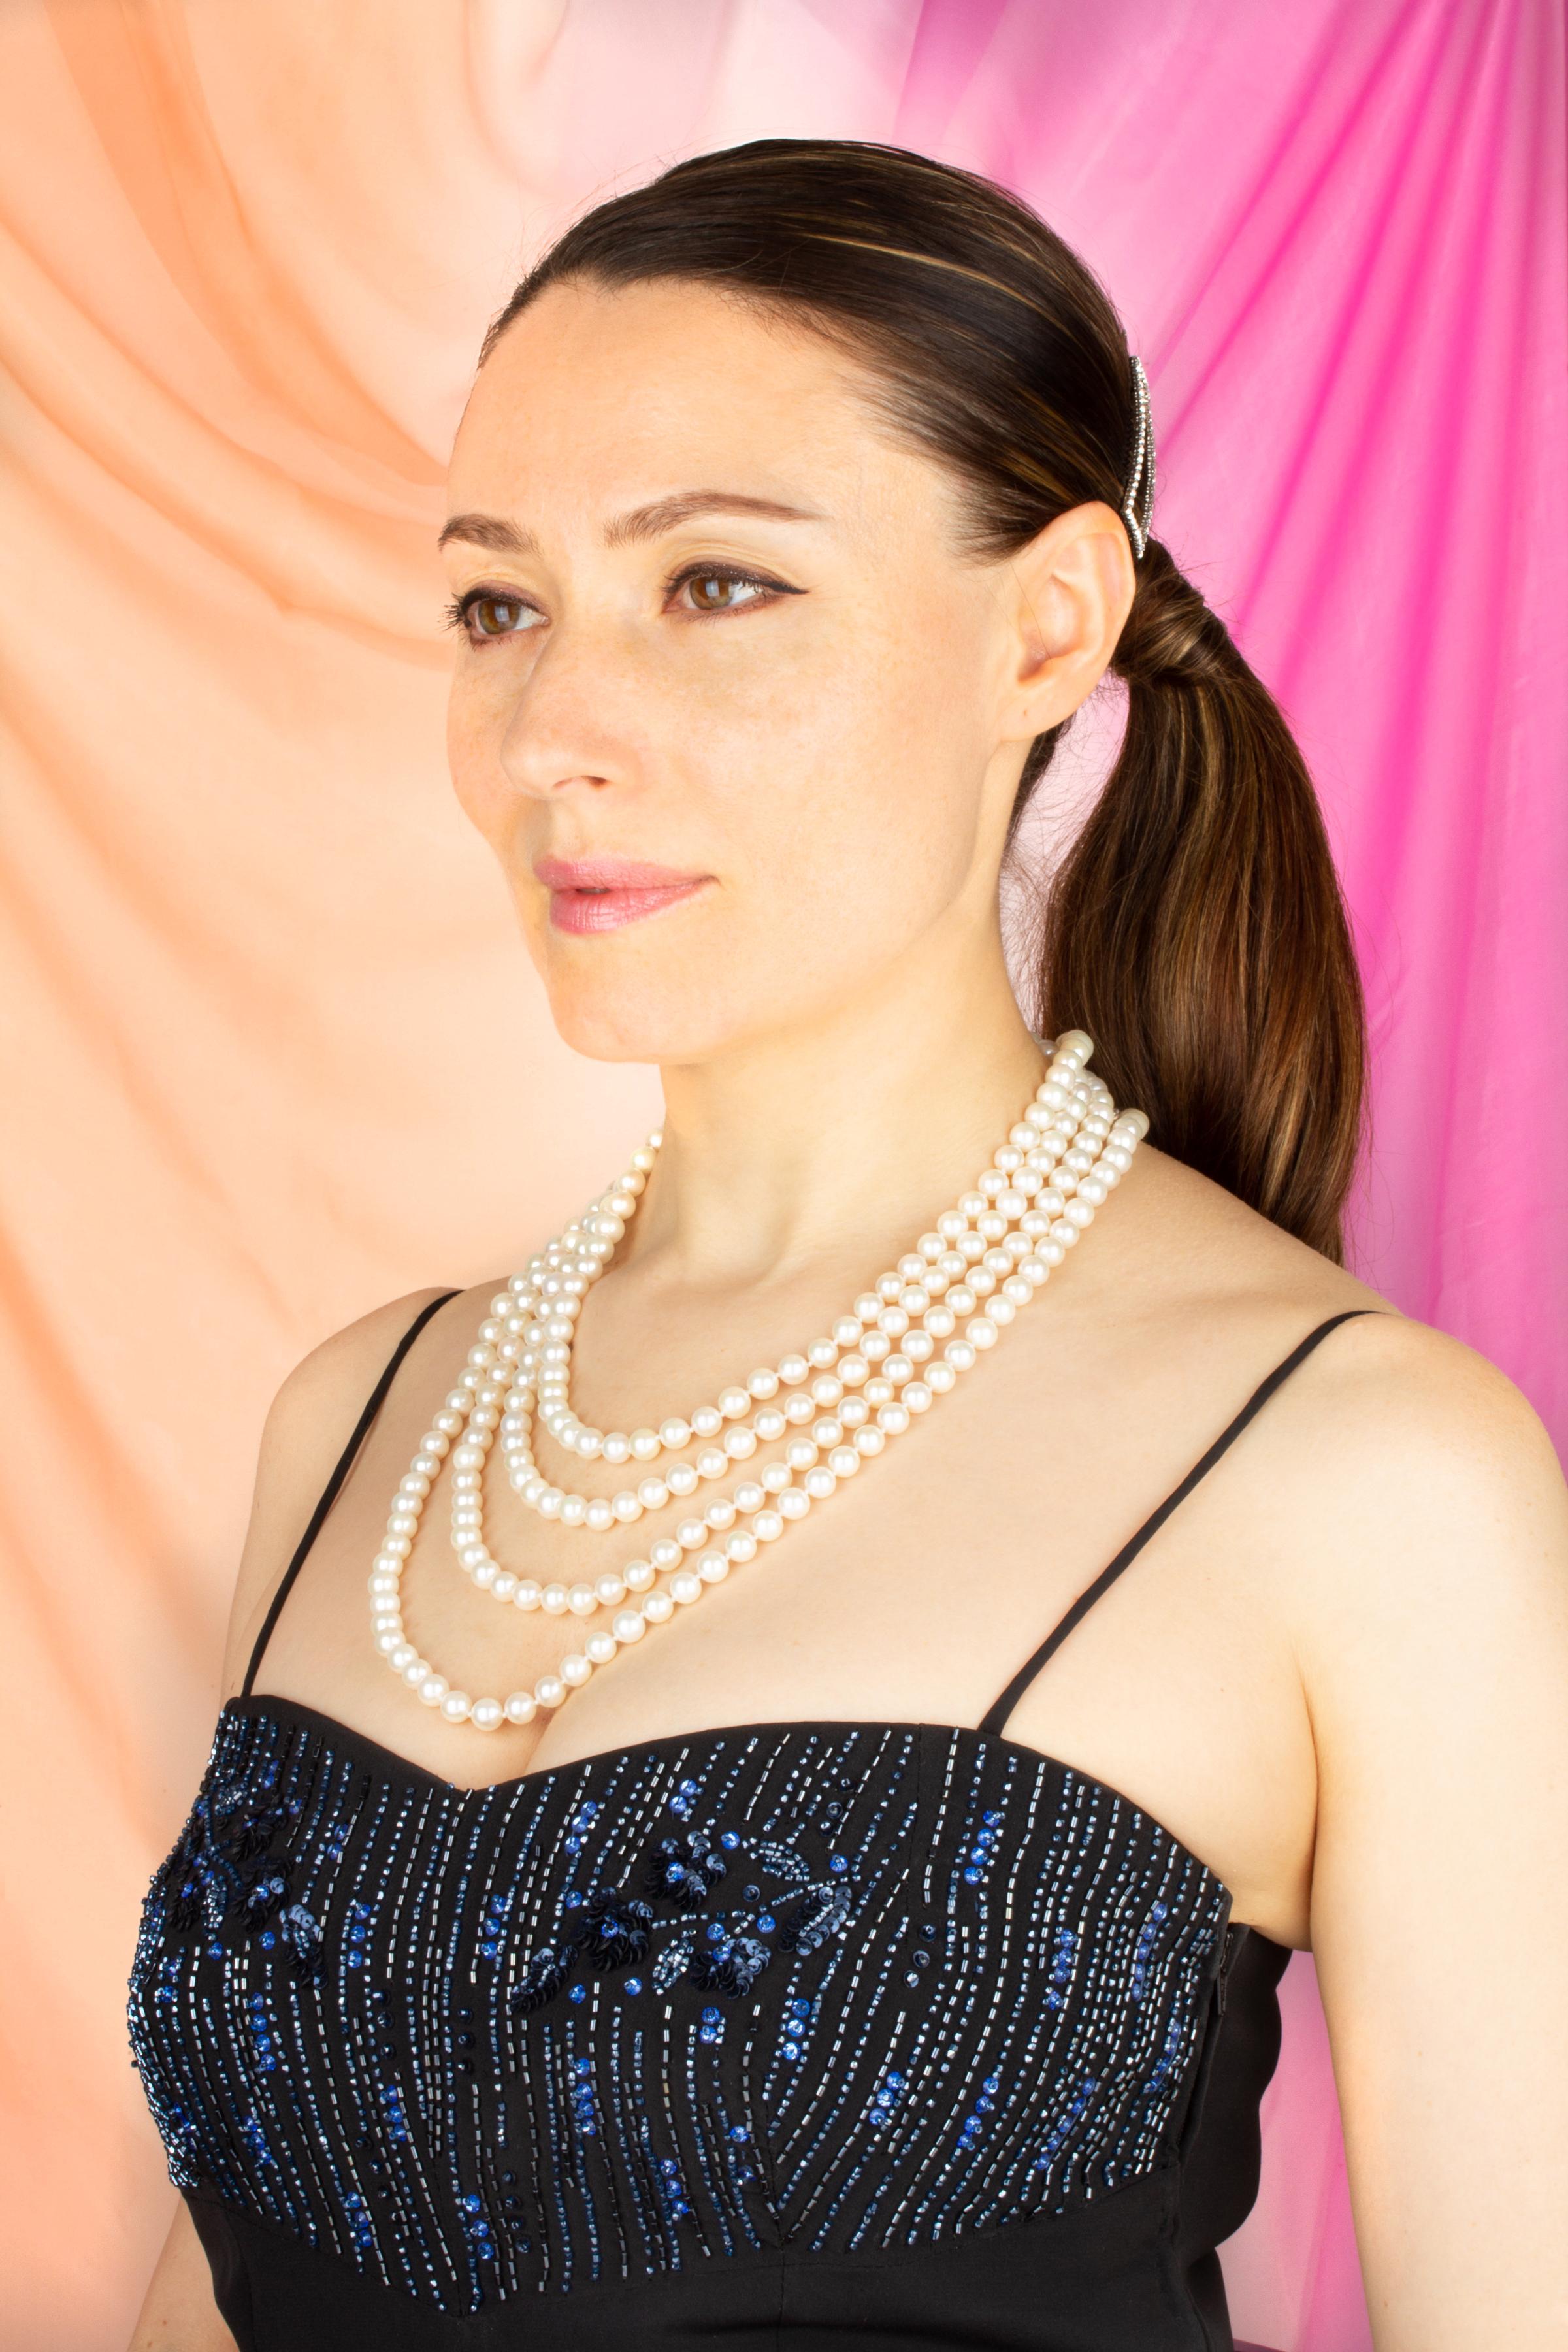 The 88” Japanese Akoya pearl necklace consists of 270 homogeneous round pearls (Pinctada Fucata) of 7.5/8mm diameter. The pearls display a lovely nacre, lustre, and iridescence. The necklace is held together by a handmade 18 carat white gold clasp